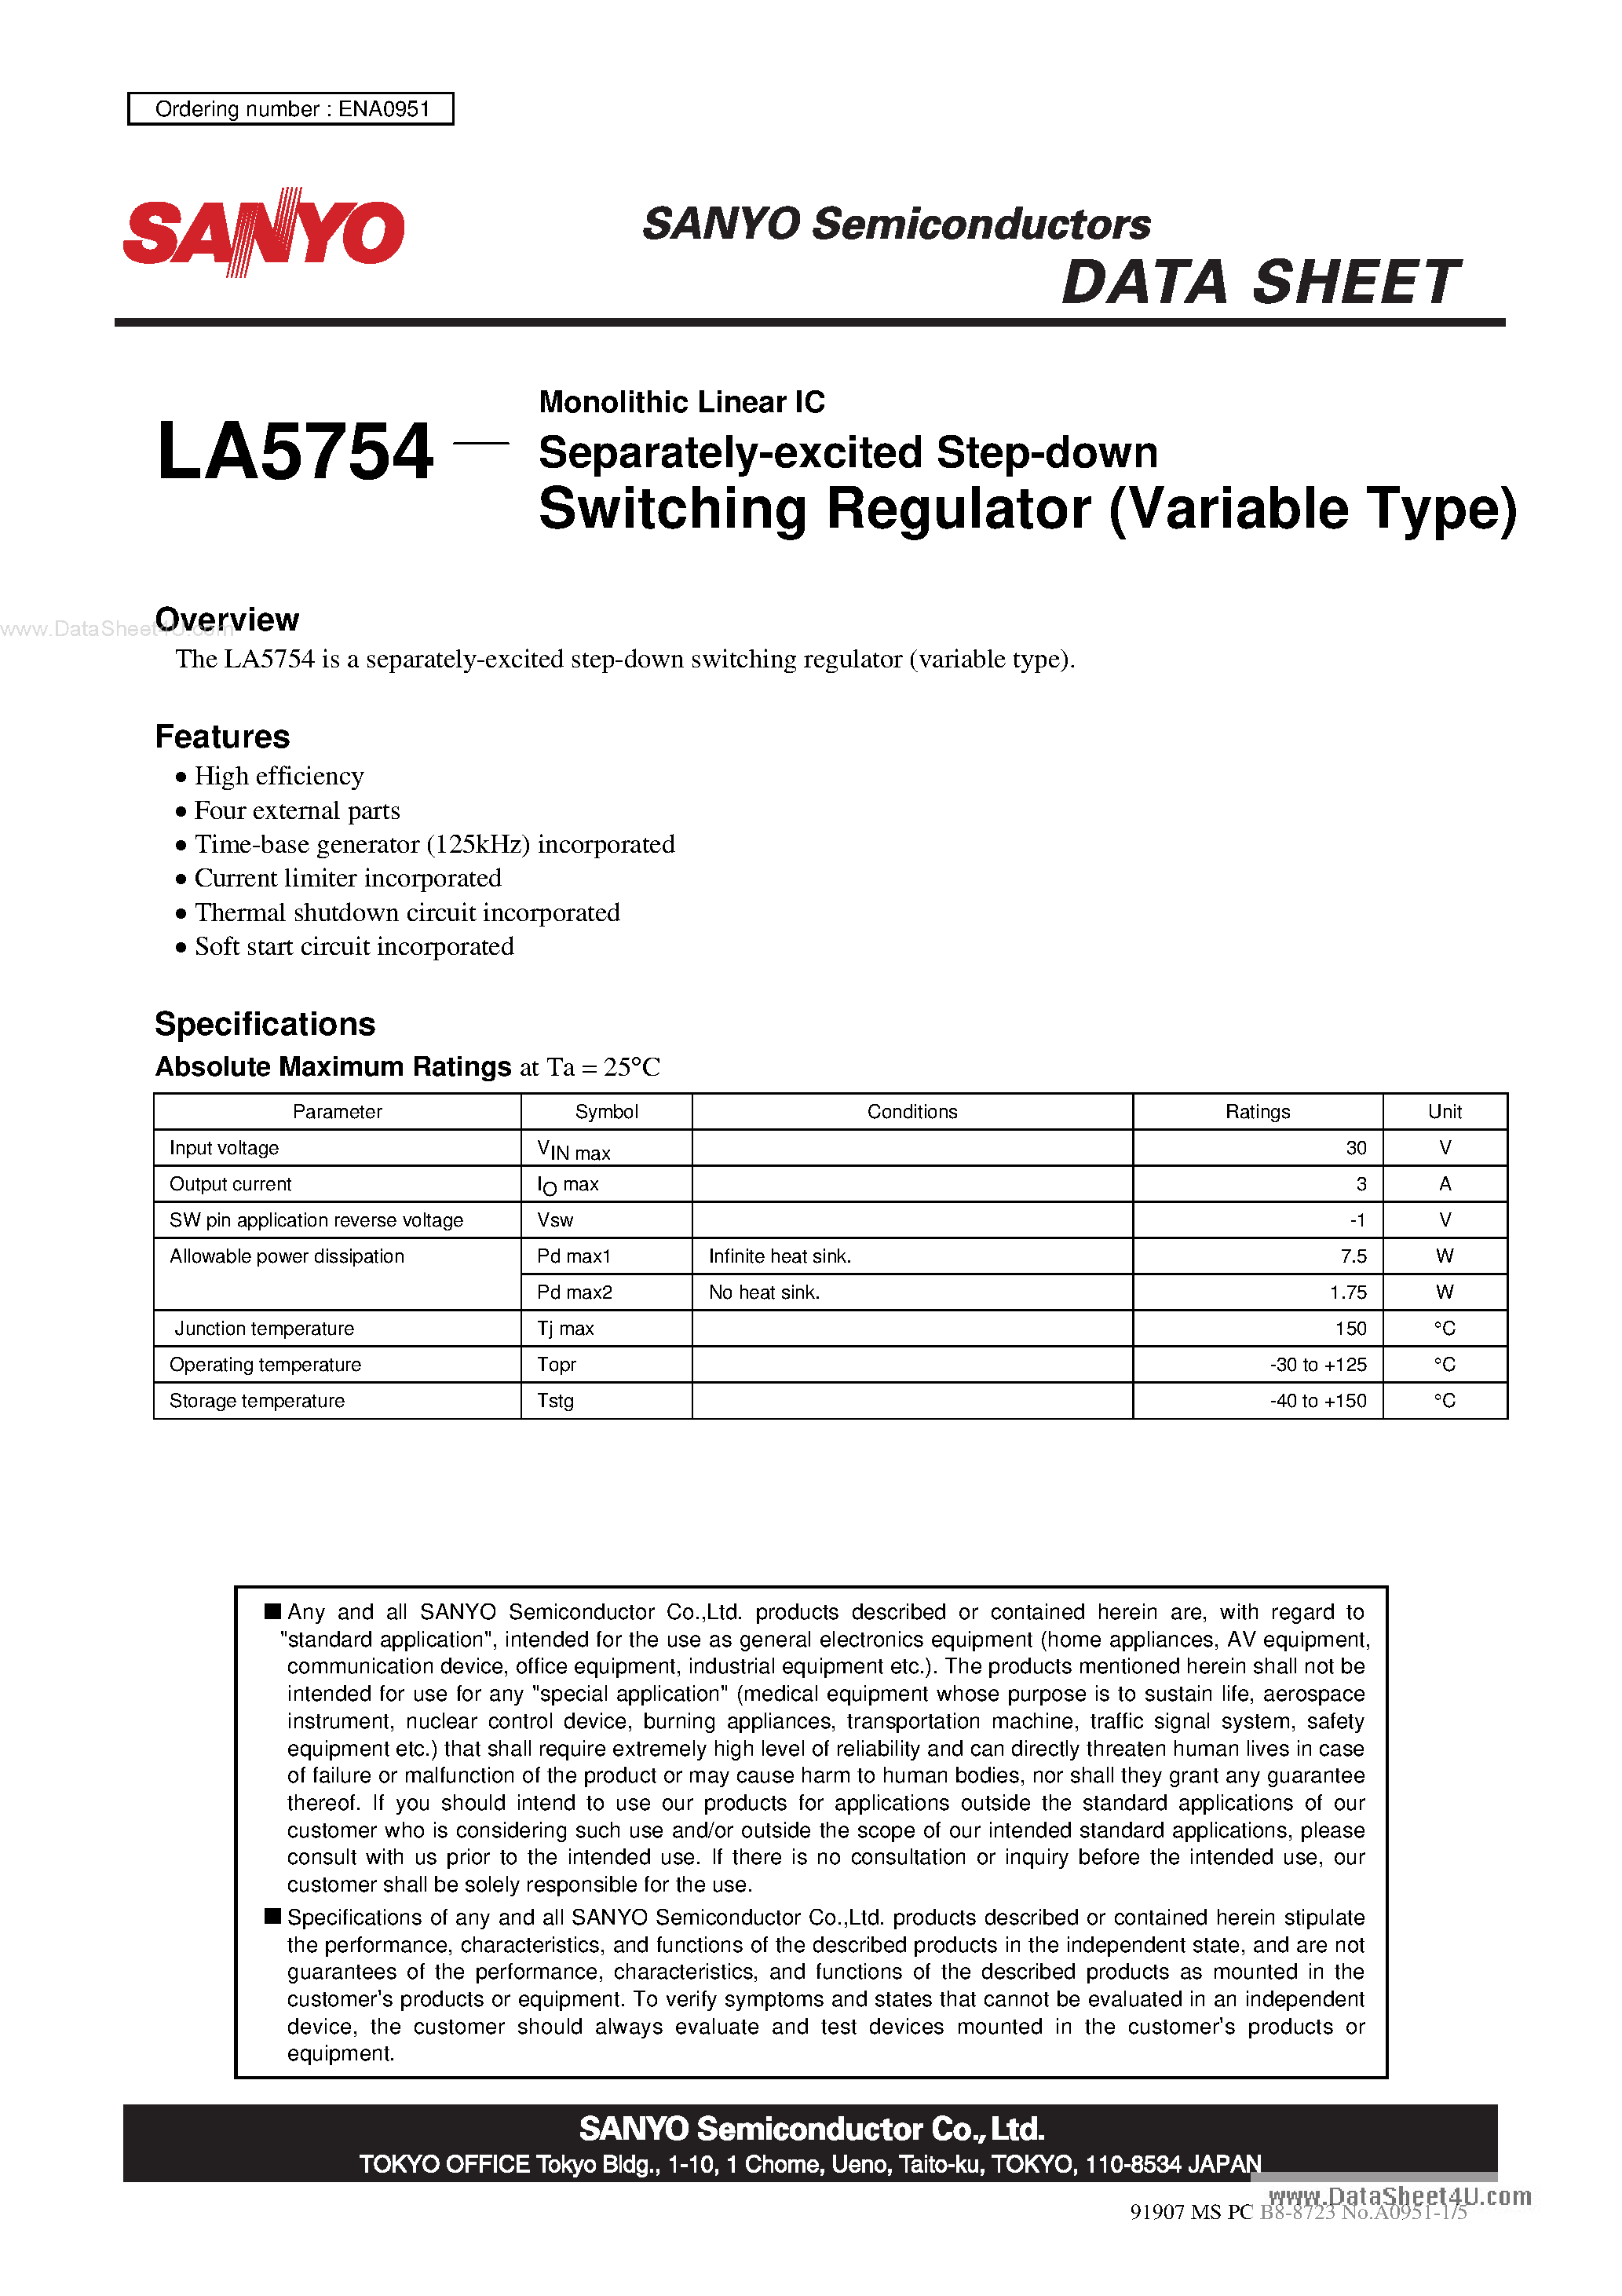 Даташит LA5754-Monolithic Linear IC Separately-Excited Step-Down Switching Regulator страница 1